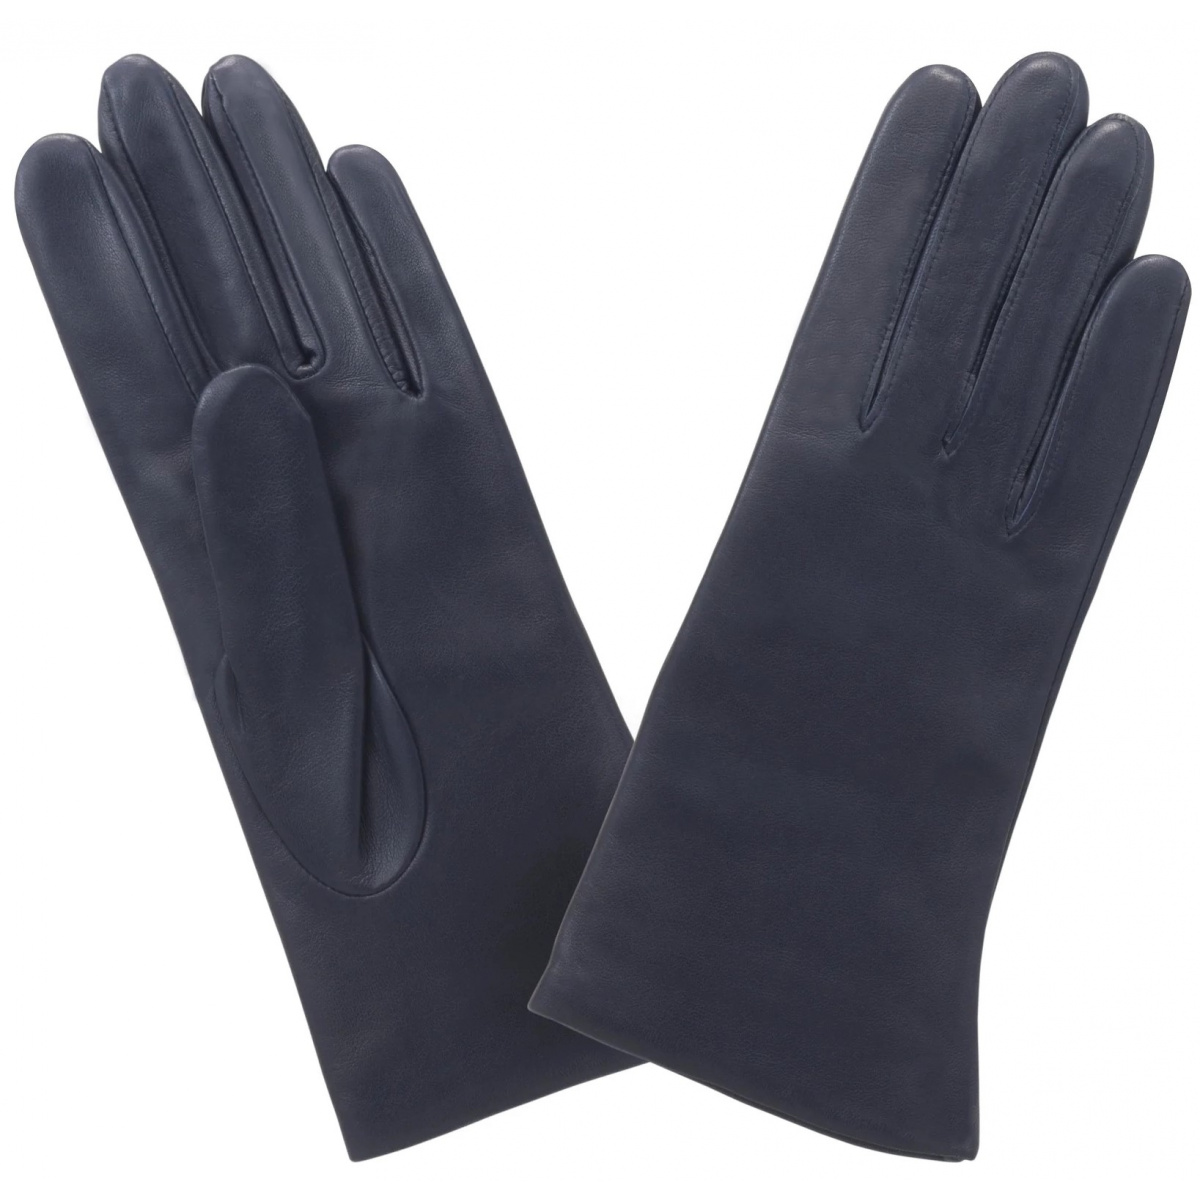 double silk leather glove isotoner